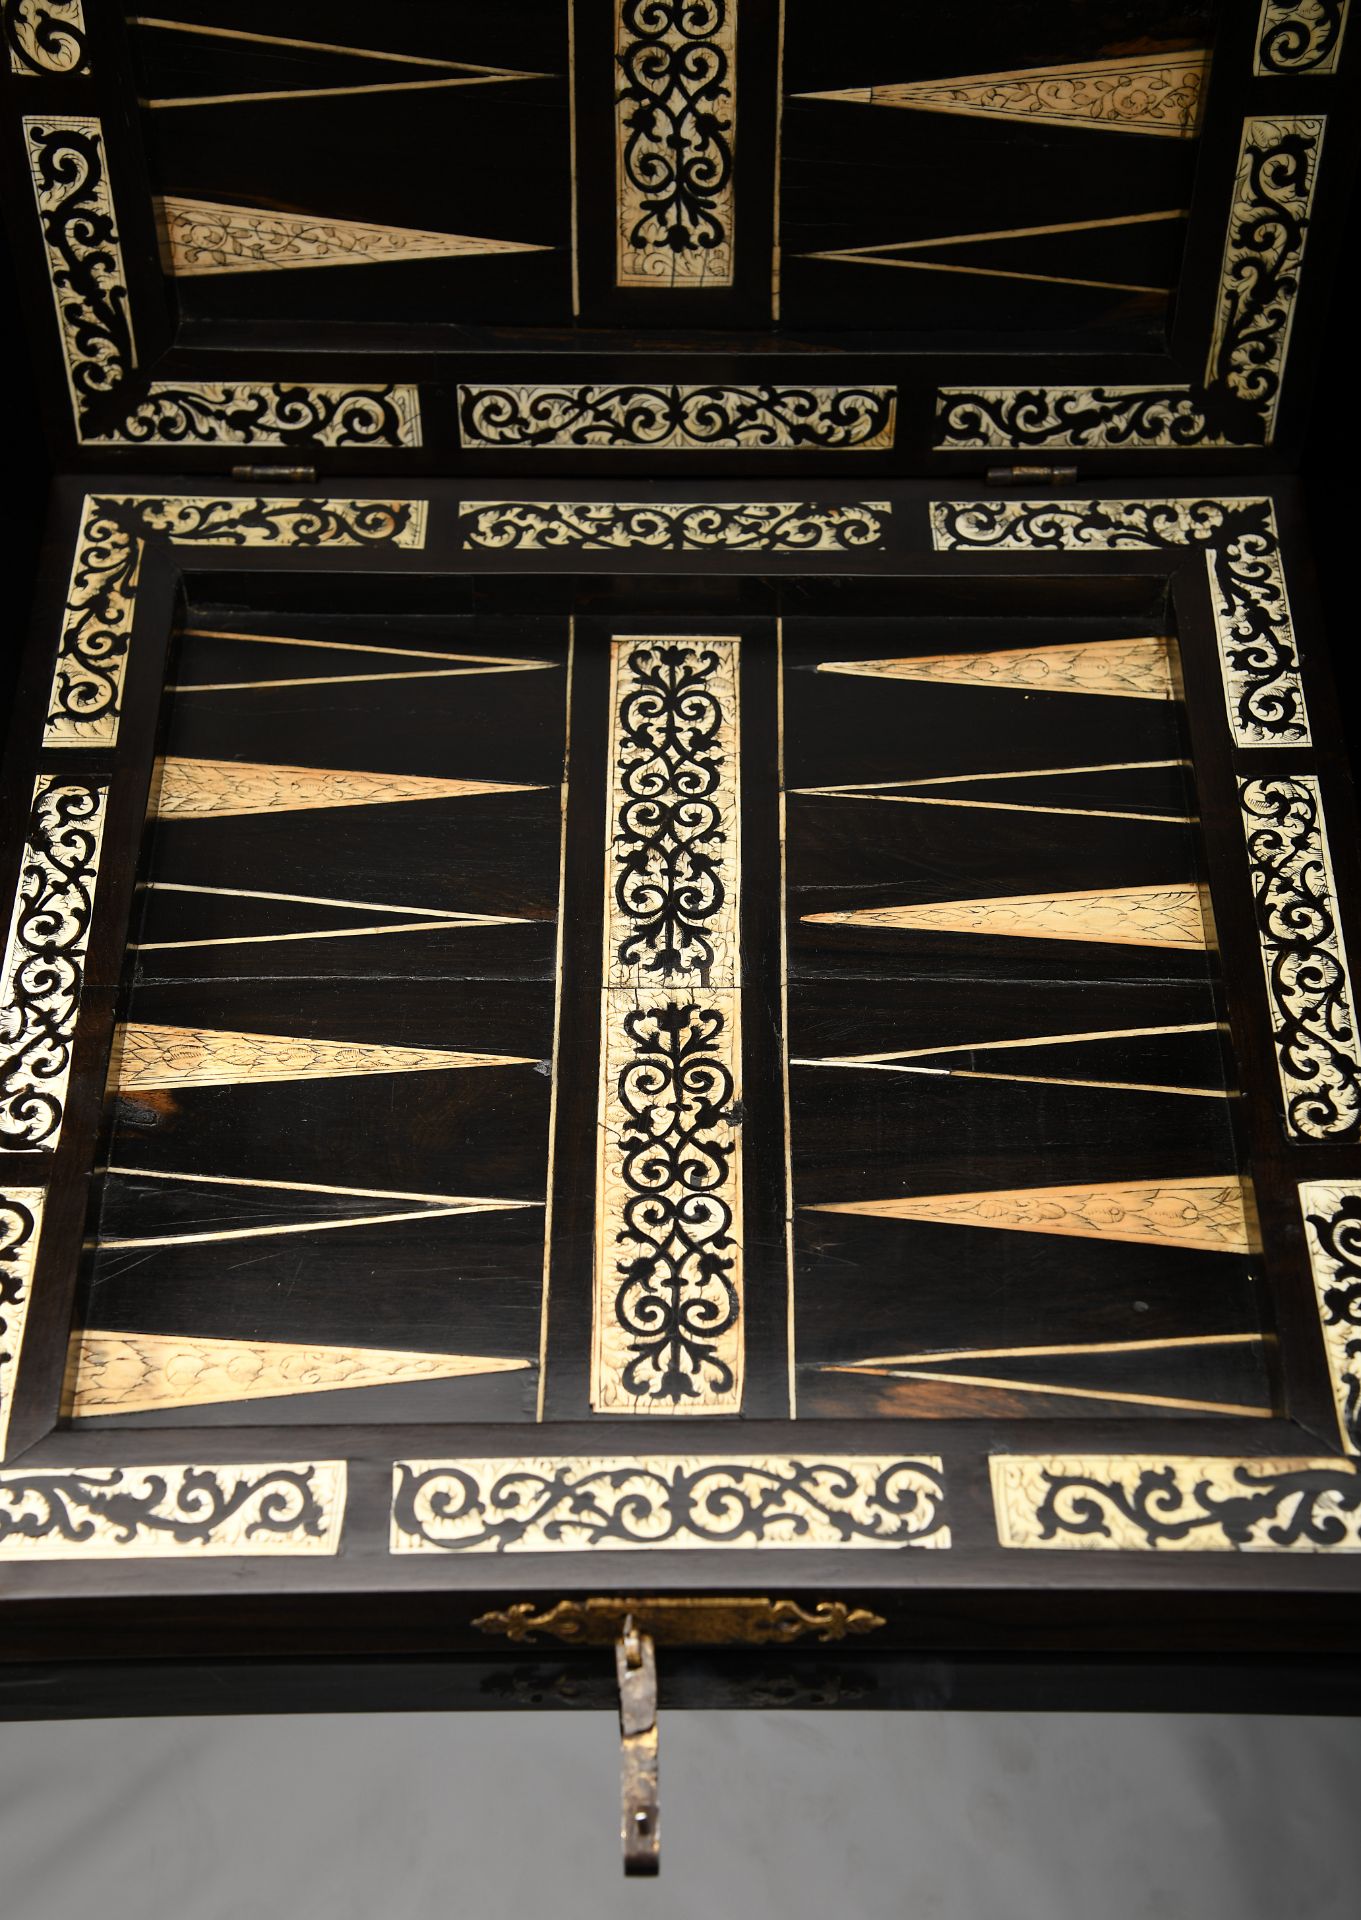 Chess, Backgammon and Nine Men’s Morris (Mill game) board articulated and closing in the shape of a  - Image 4 of 9